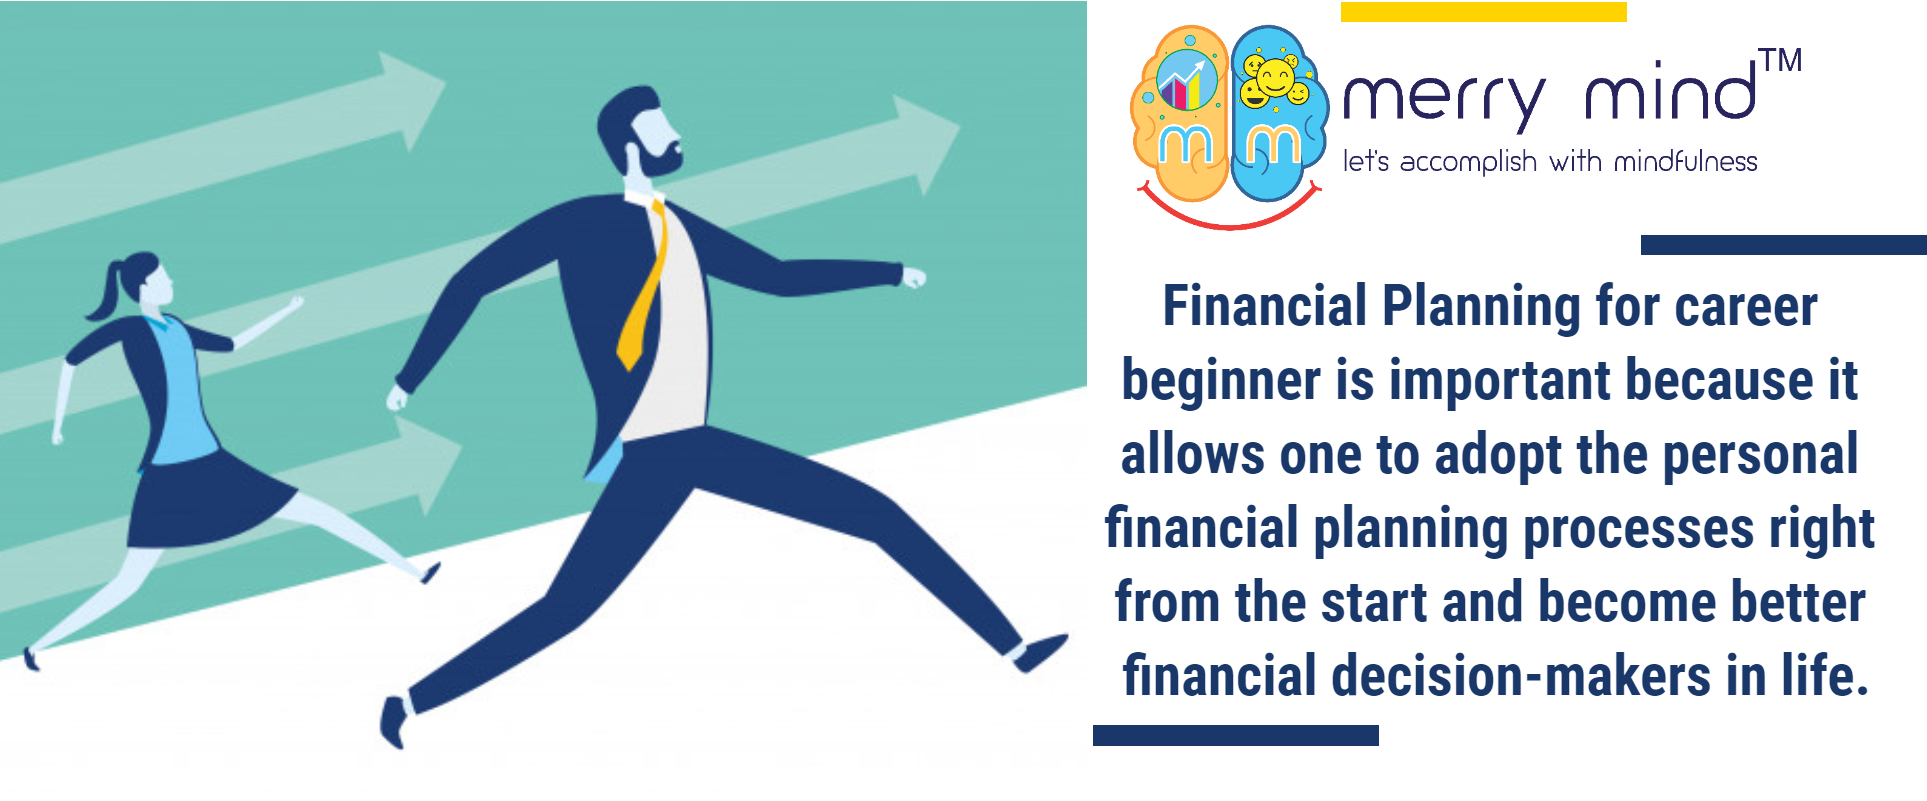 Financial Plan for career beginner sets the right mindset towards financial well-being.